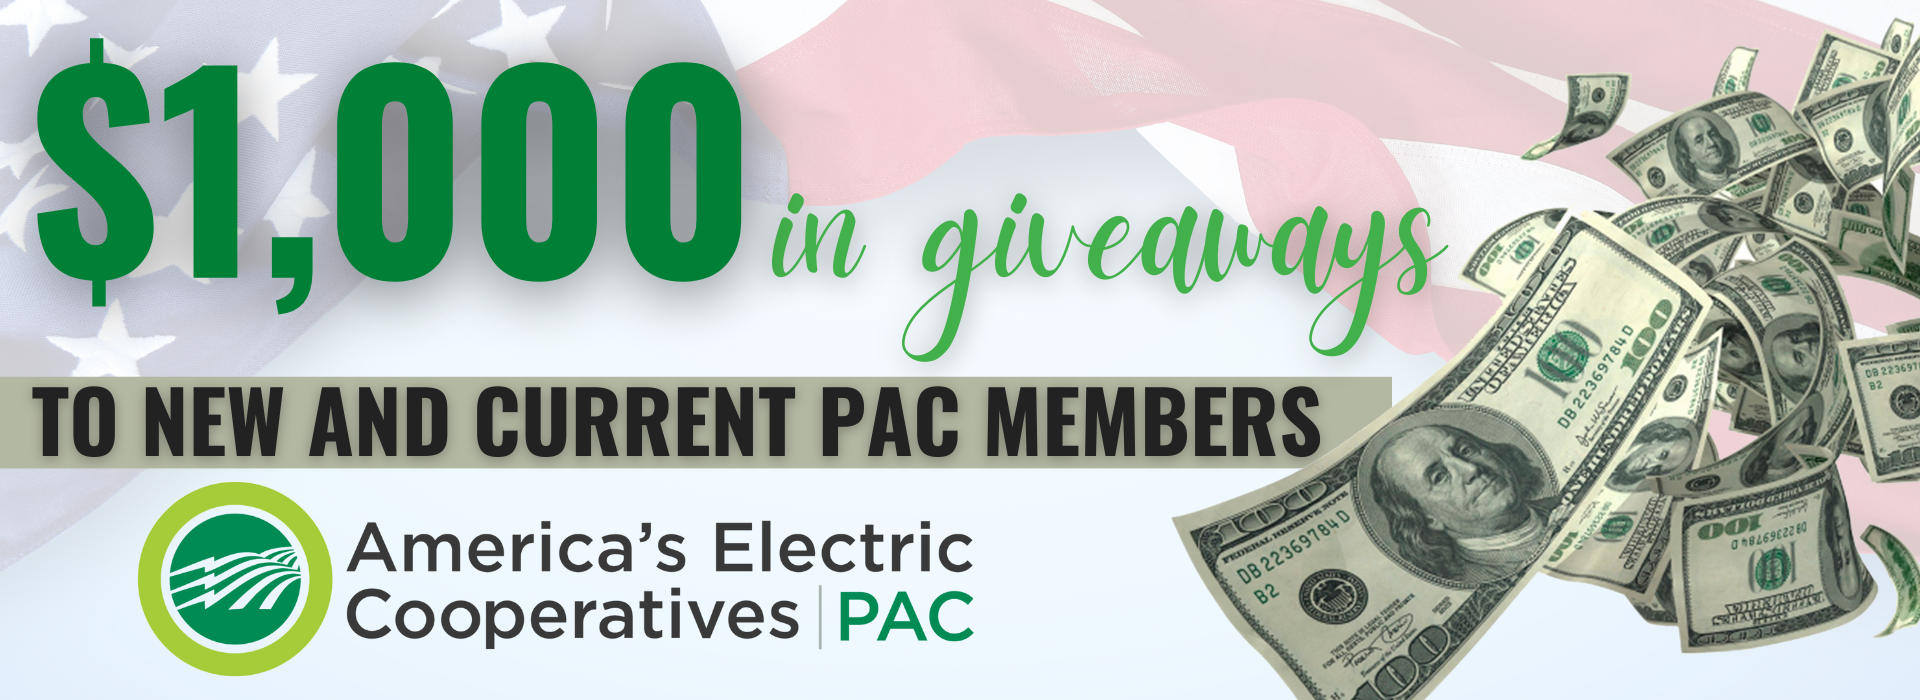 $1,000 in giveaways to PAC members